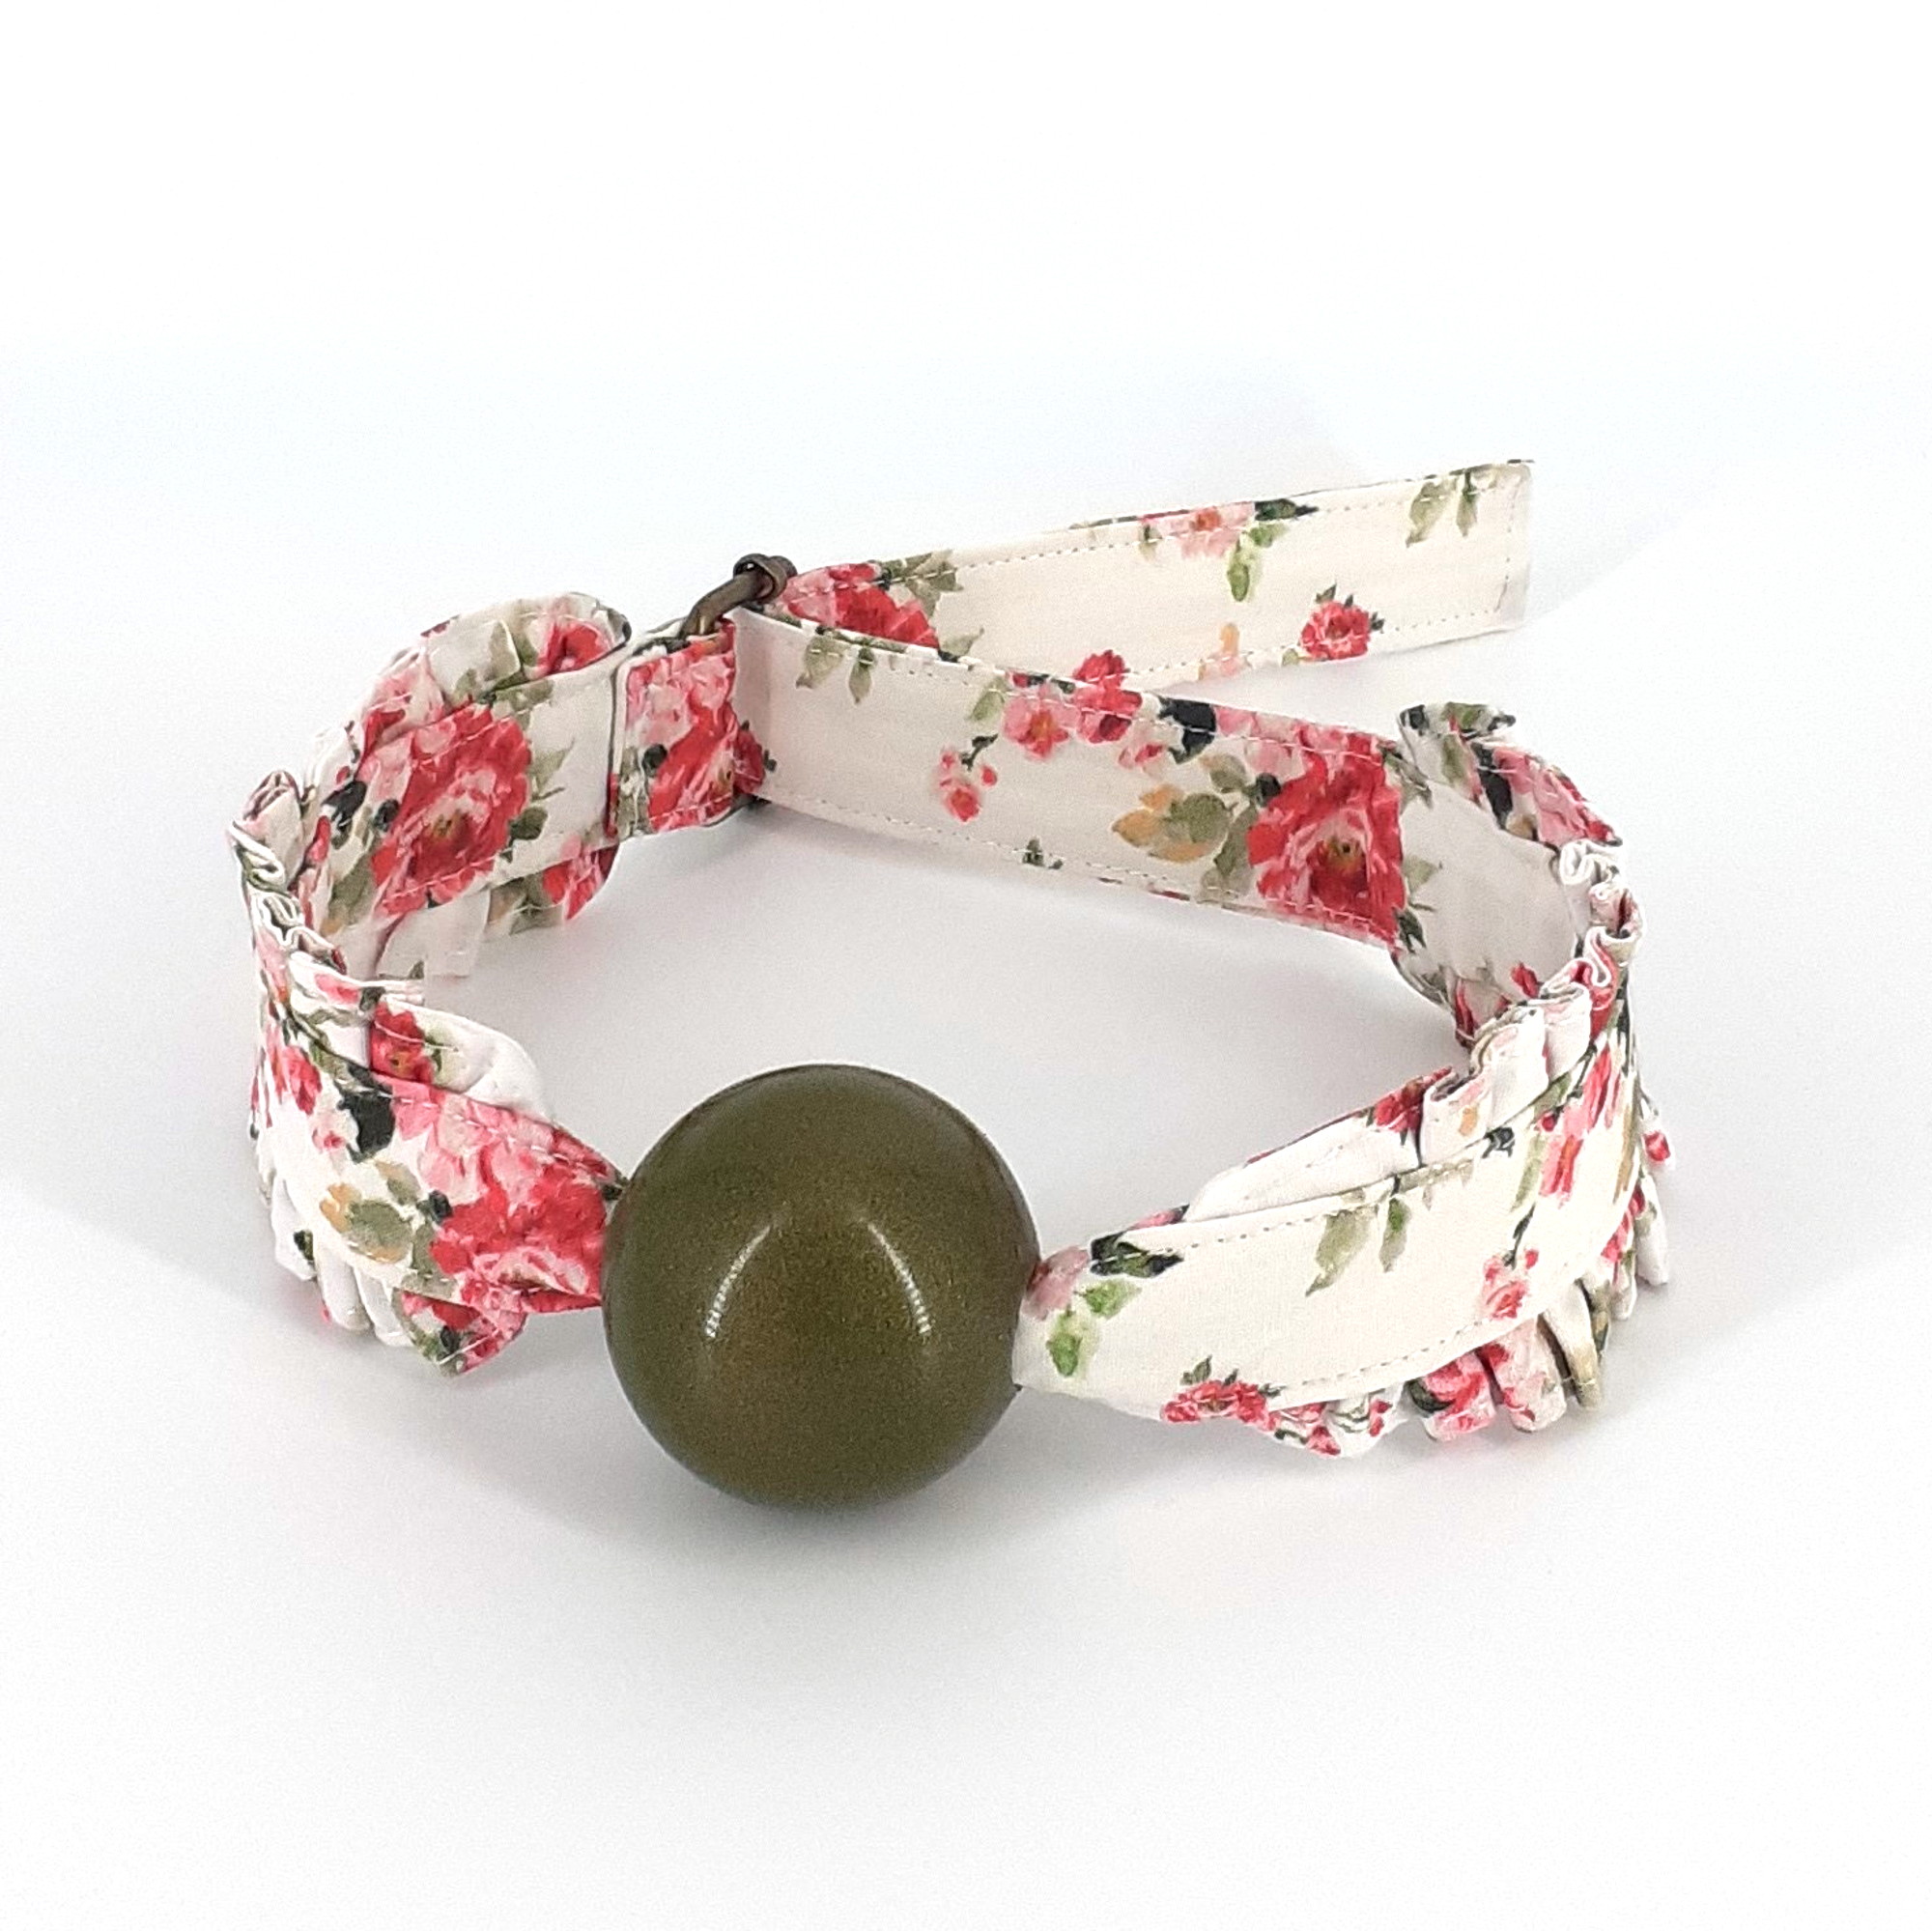 Ribbon with roses